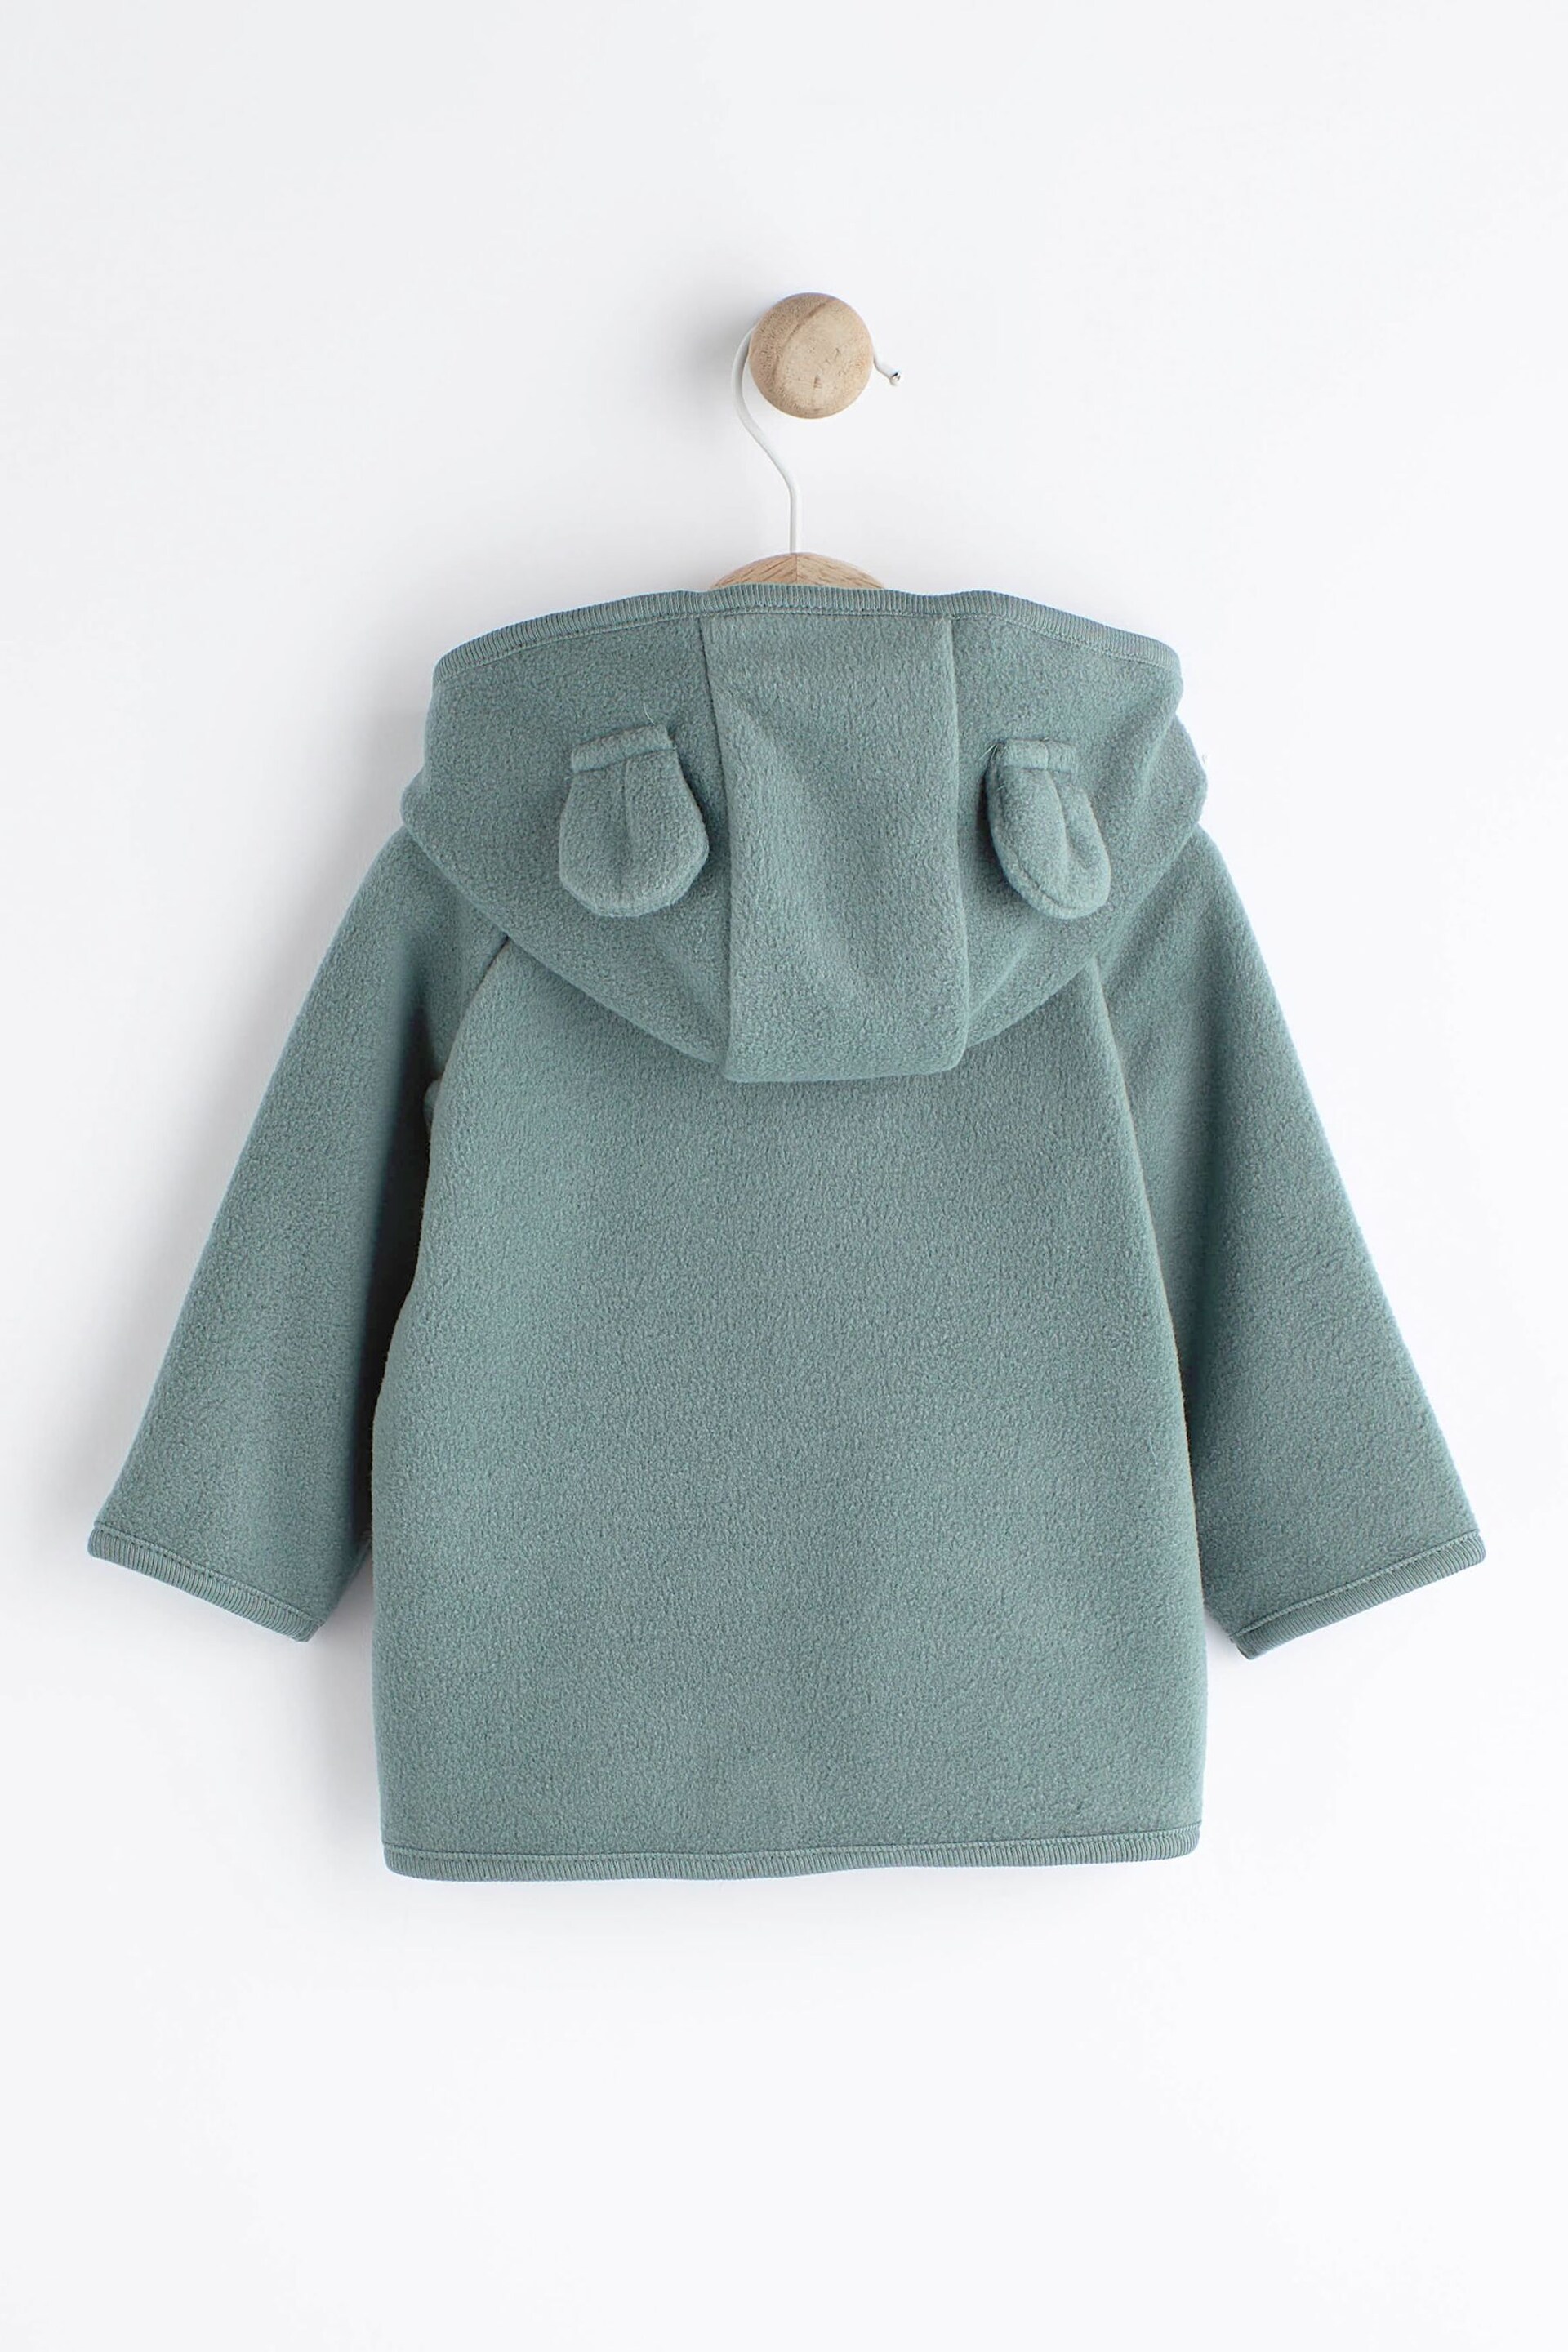 Teal Blue Hooded Cosy Fleece Baby Jacket (0mths-2yrs) - Image 2 of 6